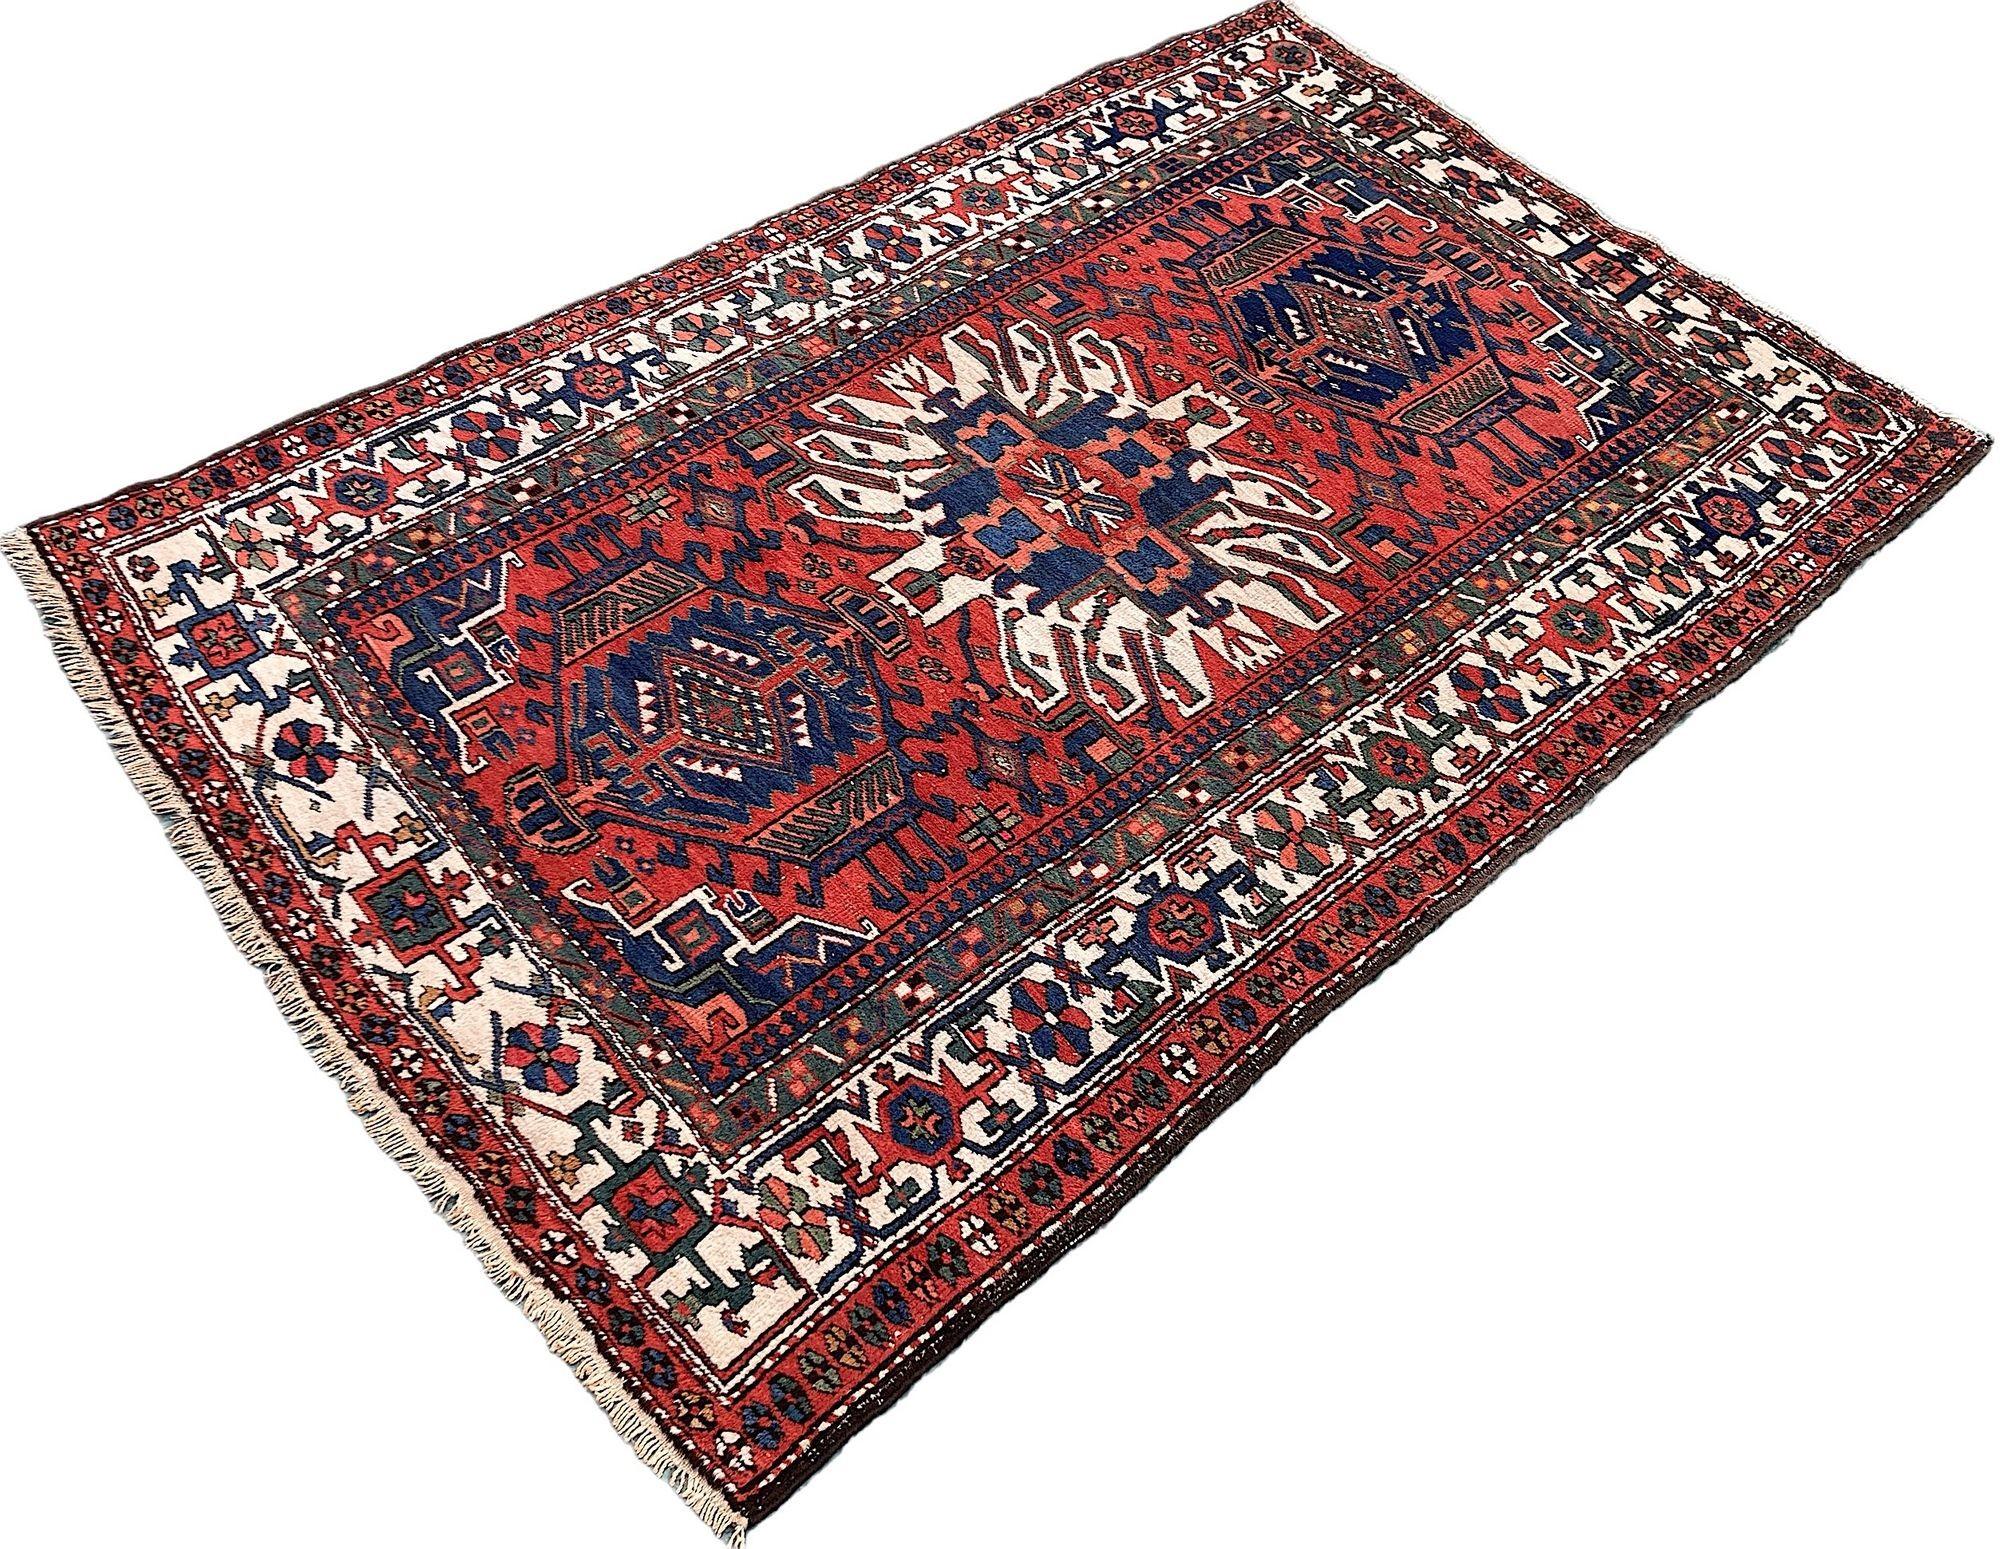 Antique Heriz Rug 2.05m x 1.37m In Good Condition For Sale In St. Albans, GB